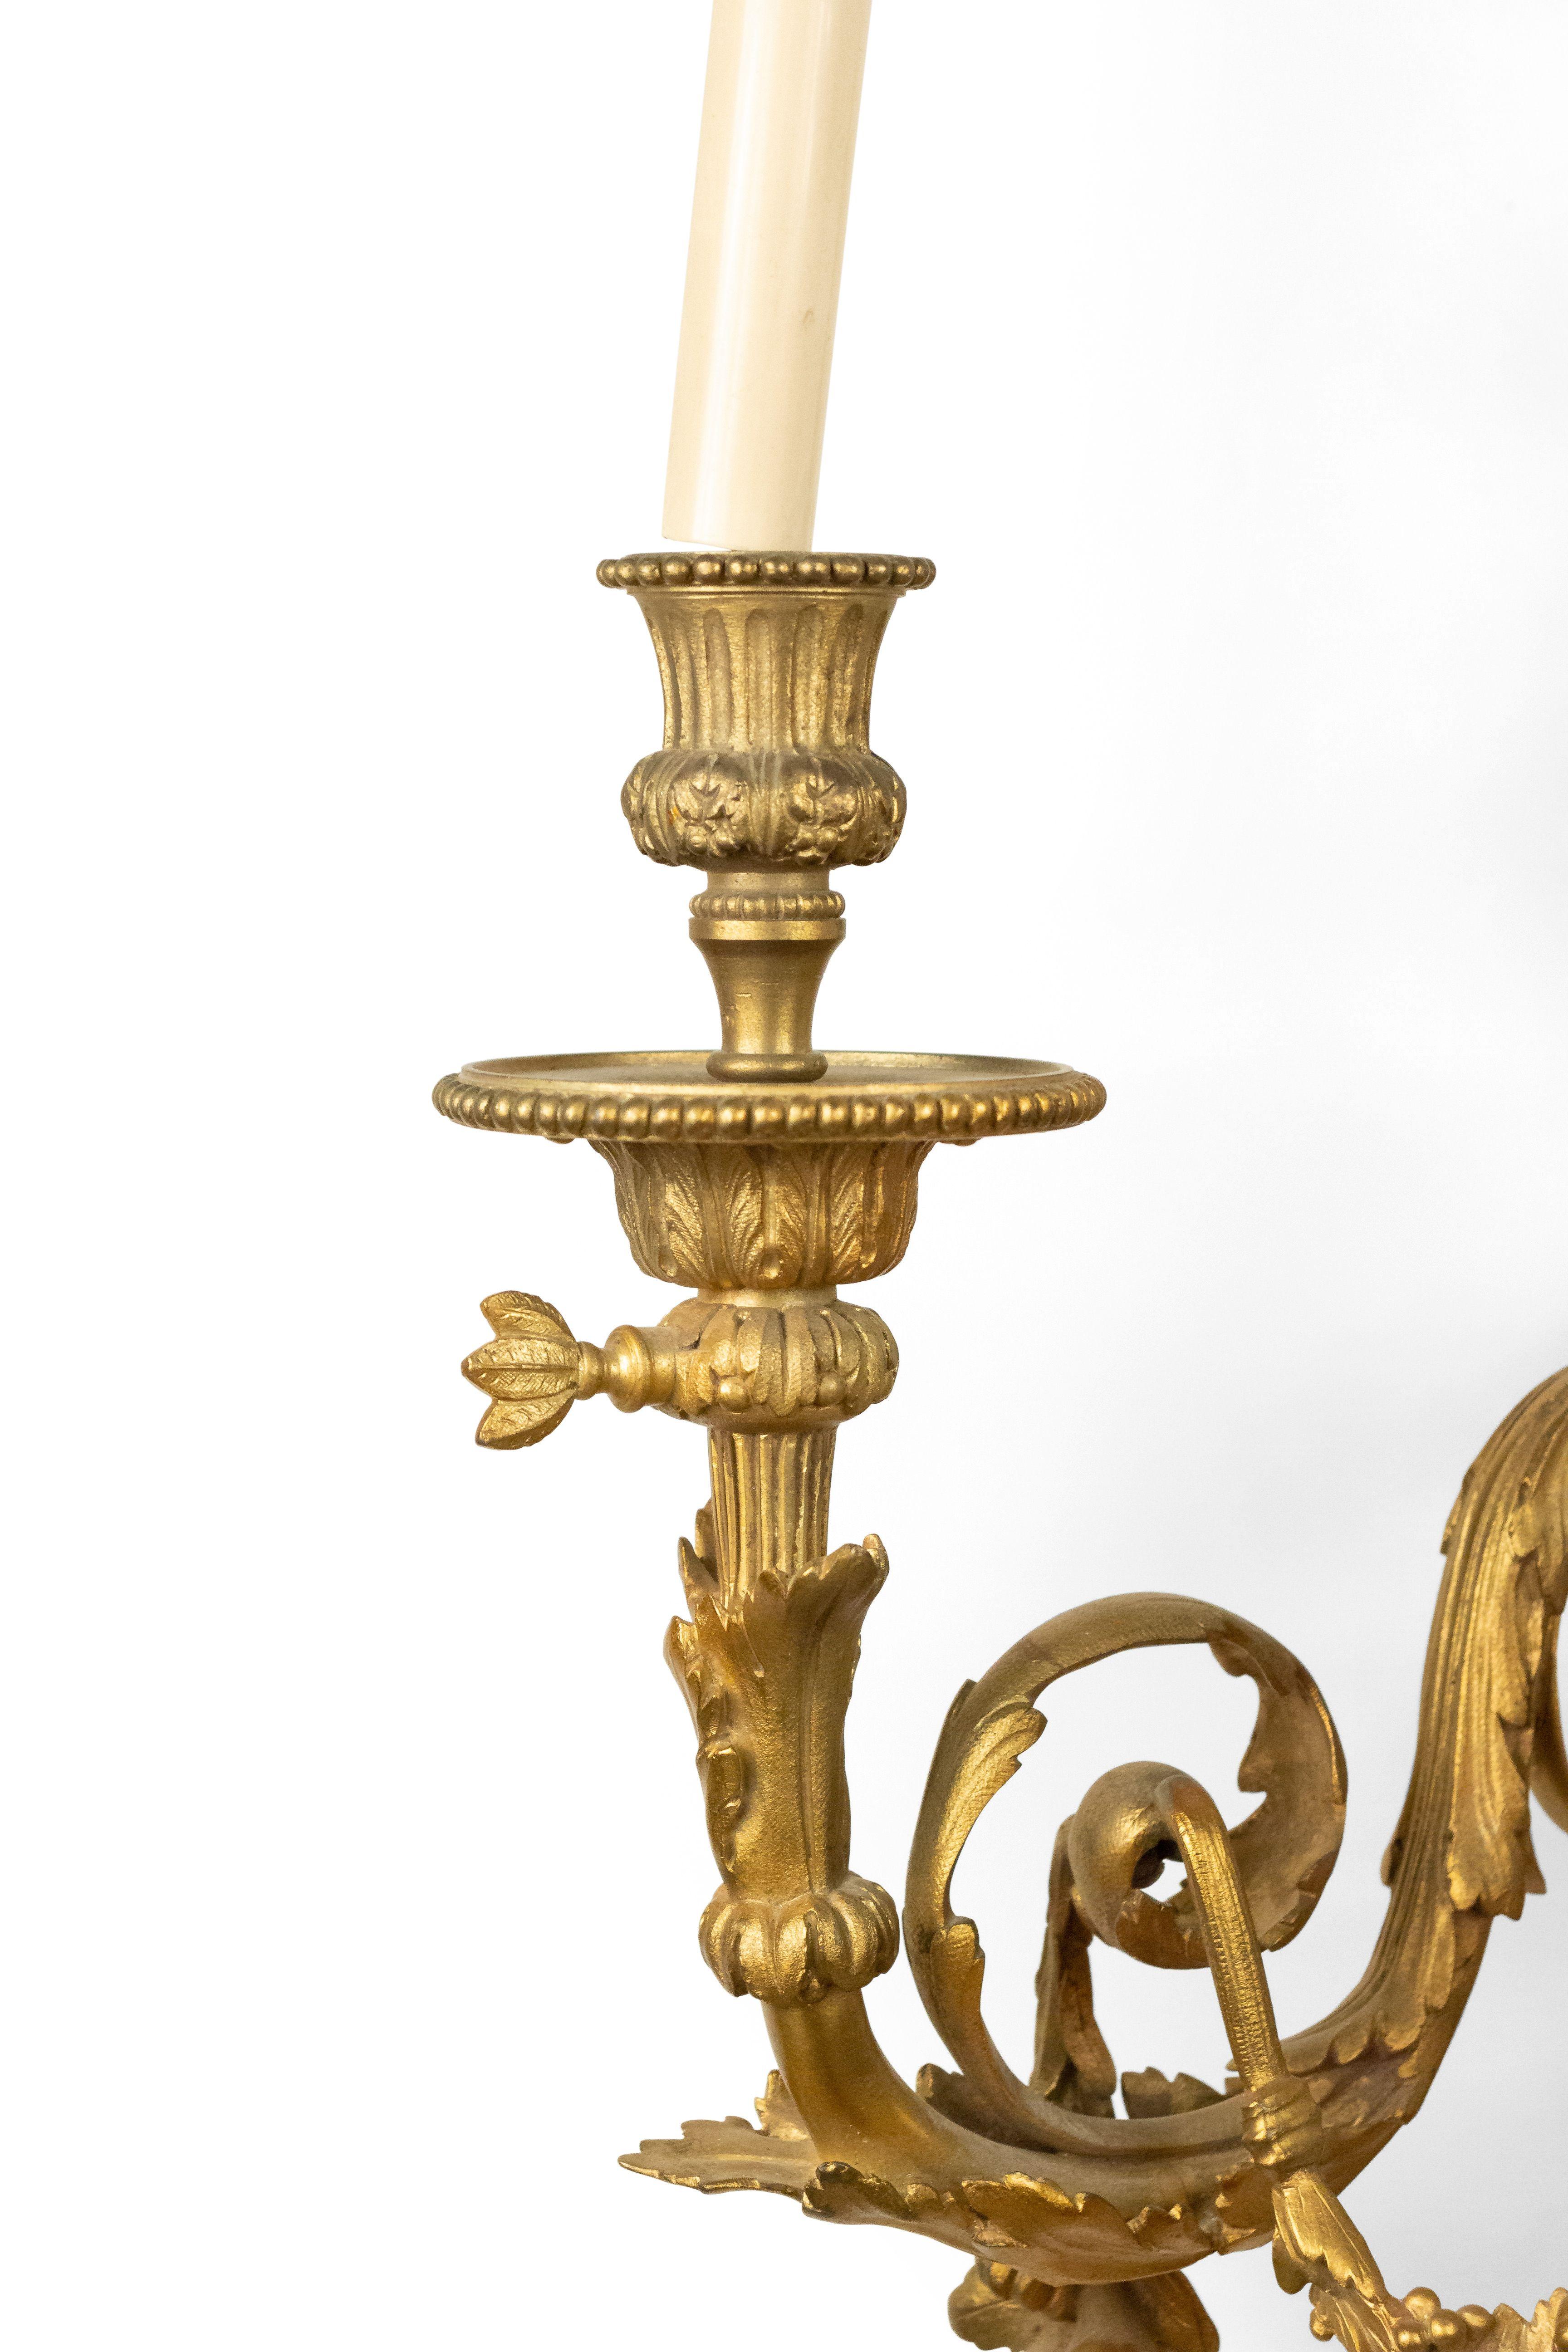 French Louis XV-Style (19th century) gilt bronze 3 arm wall sconce with scroll and festoon design with a urn top. (originally gas).
   